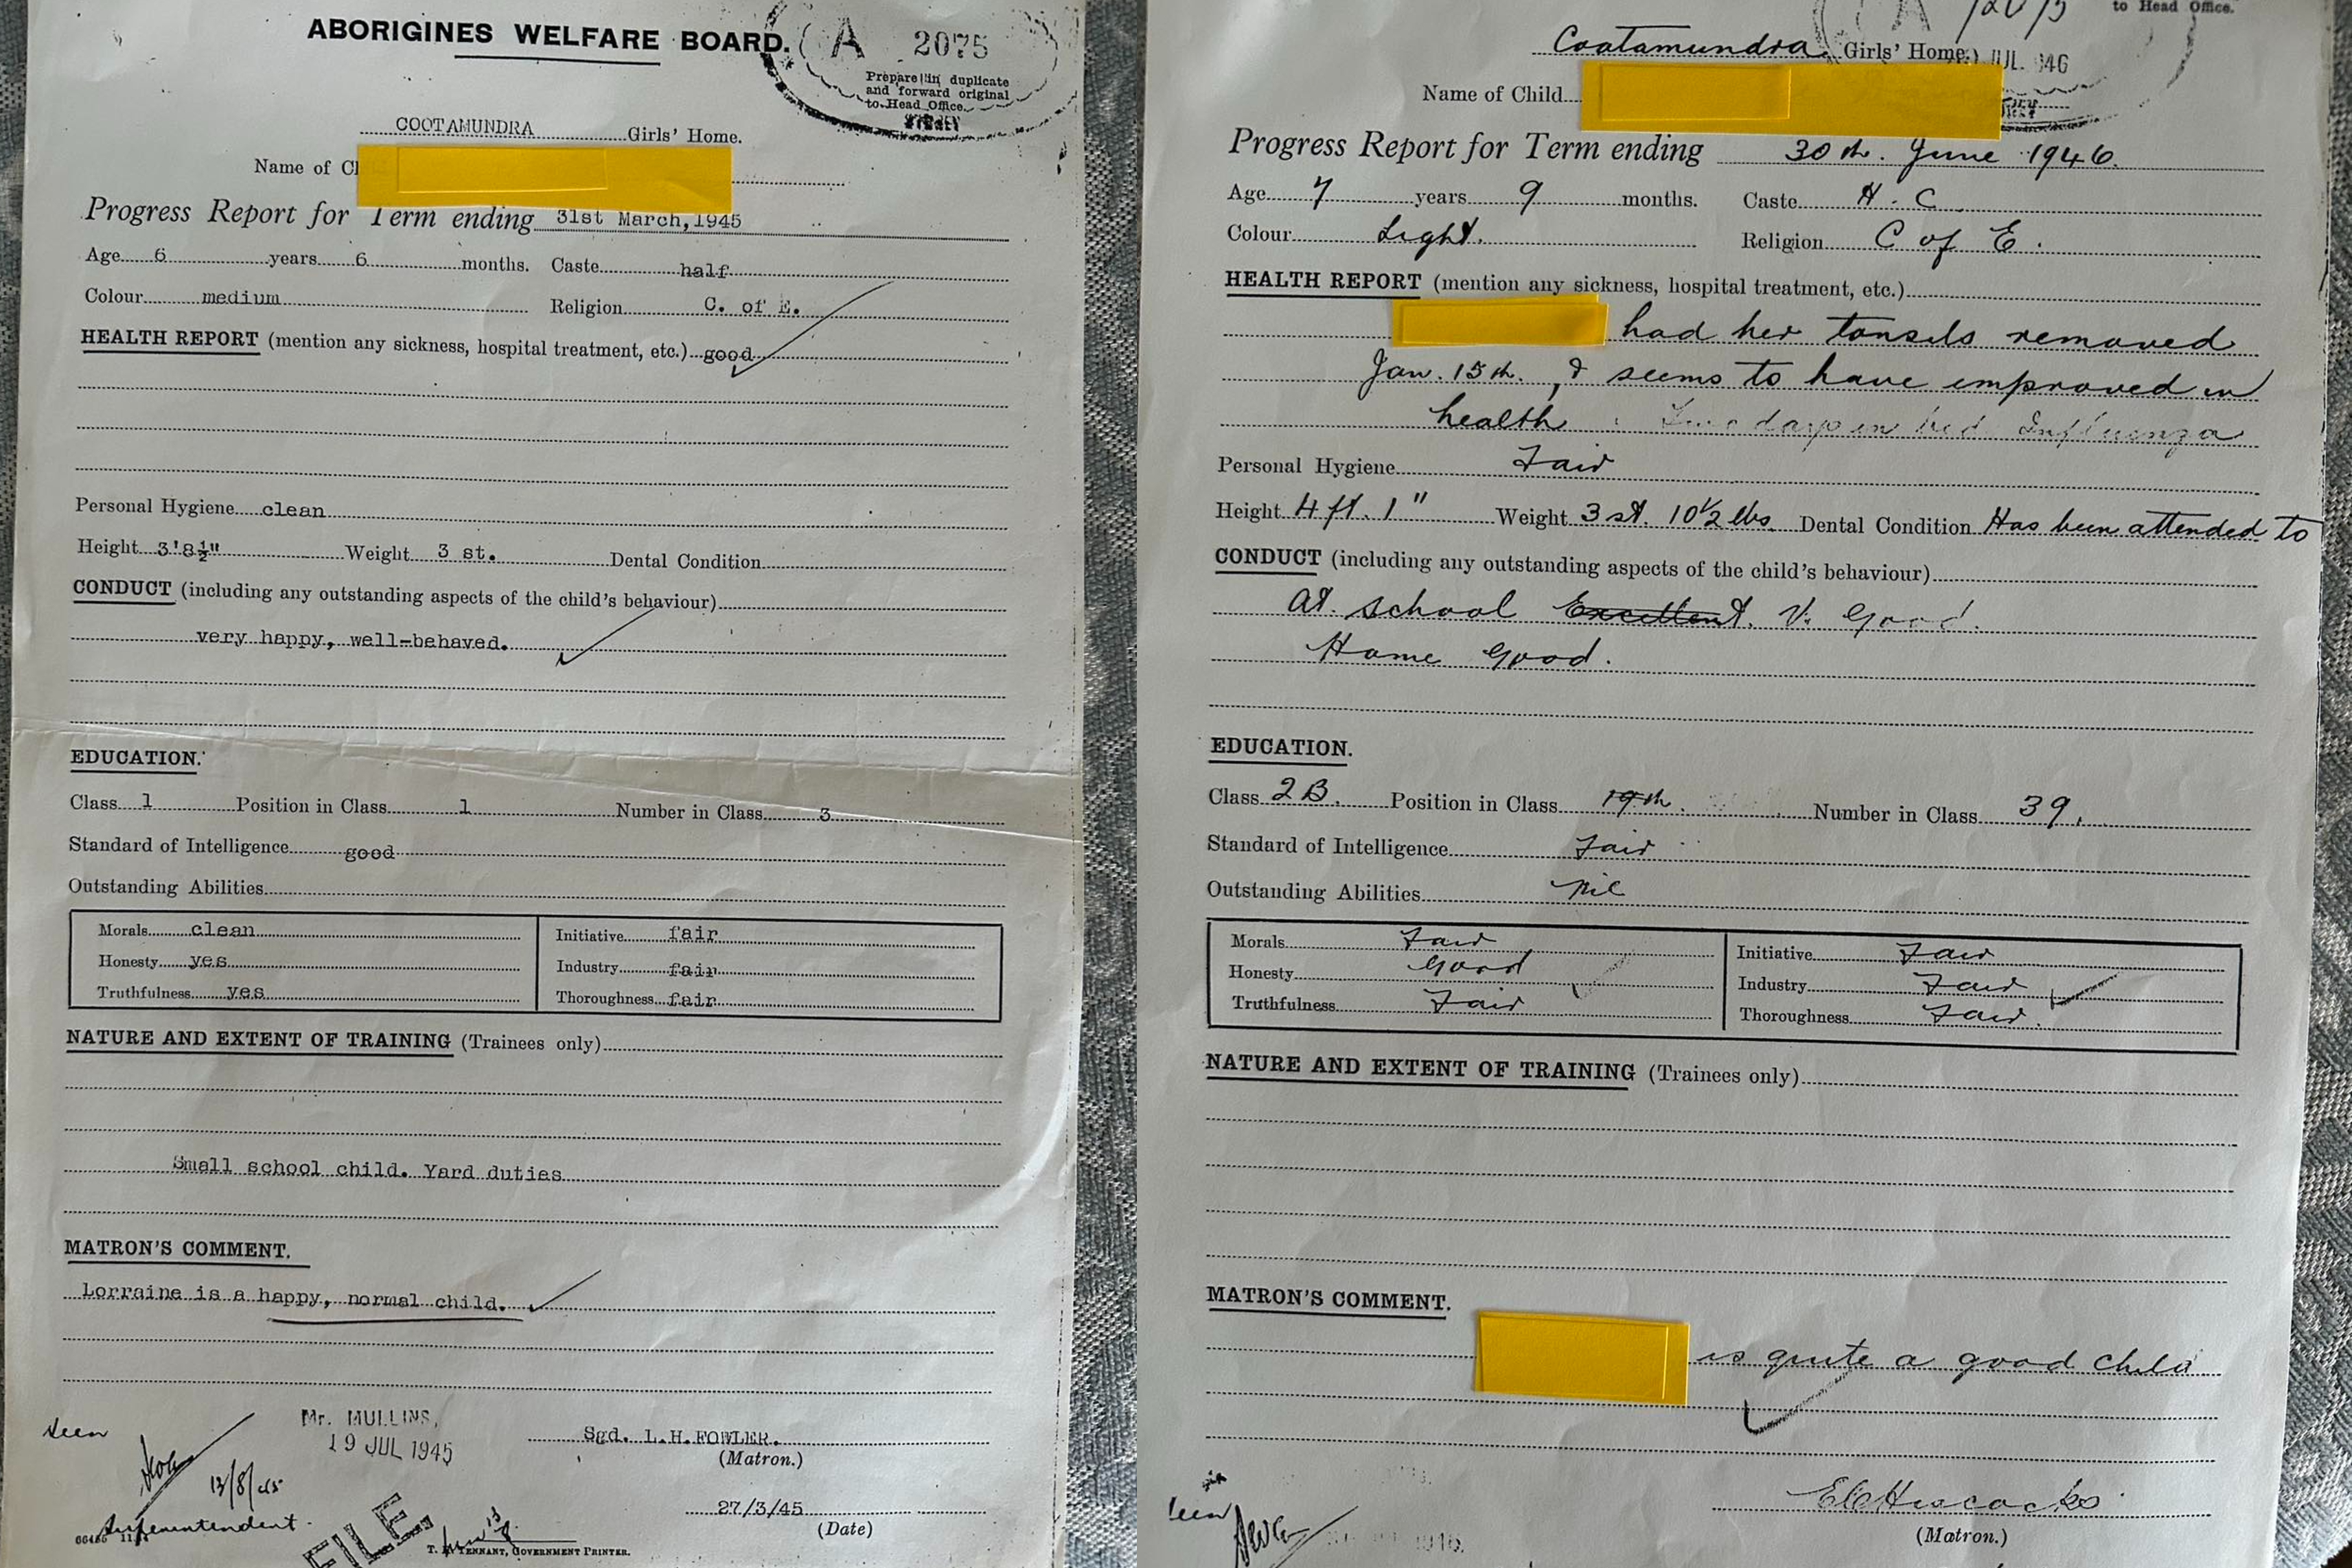 Two of Lorraine Peeters' report cards from the Aboriginies Welfare Board side-by-side